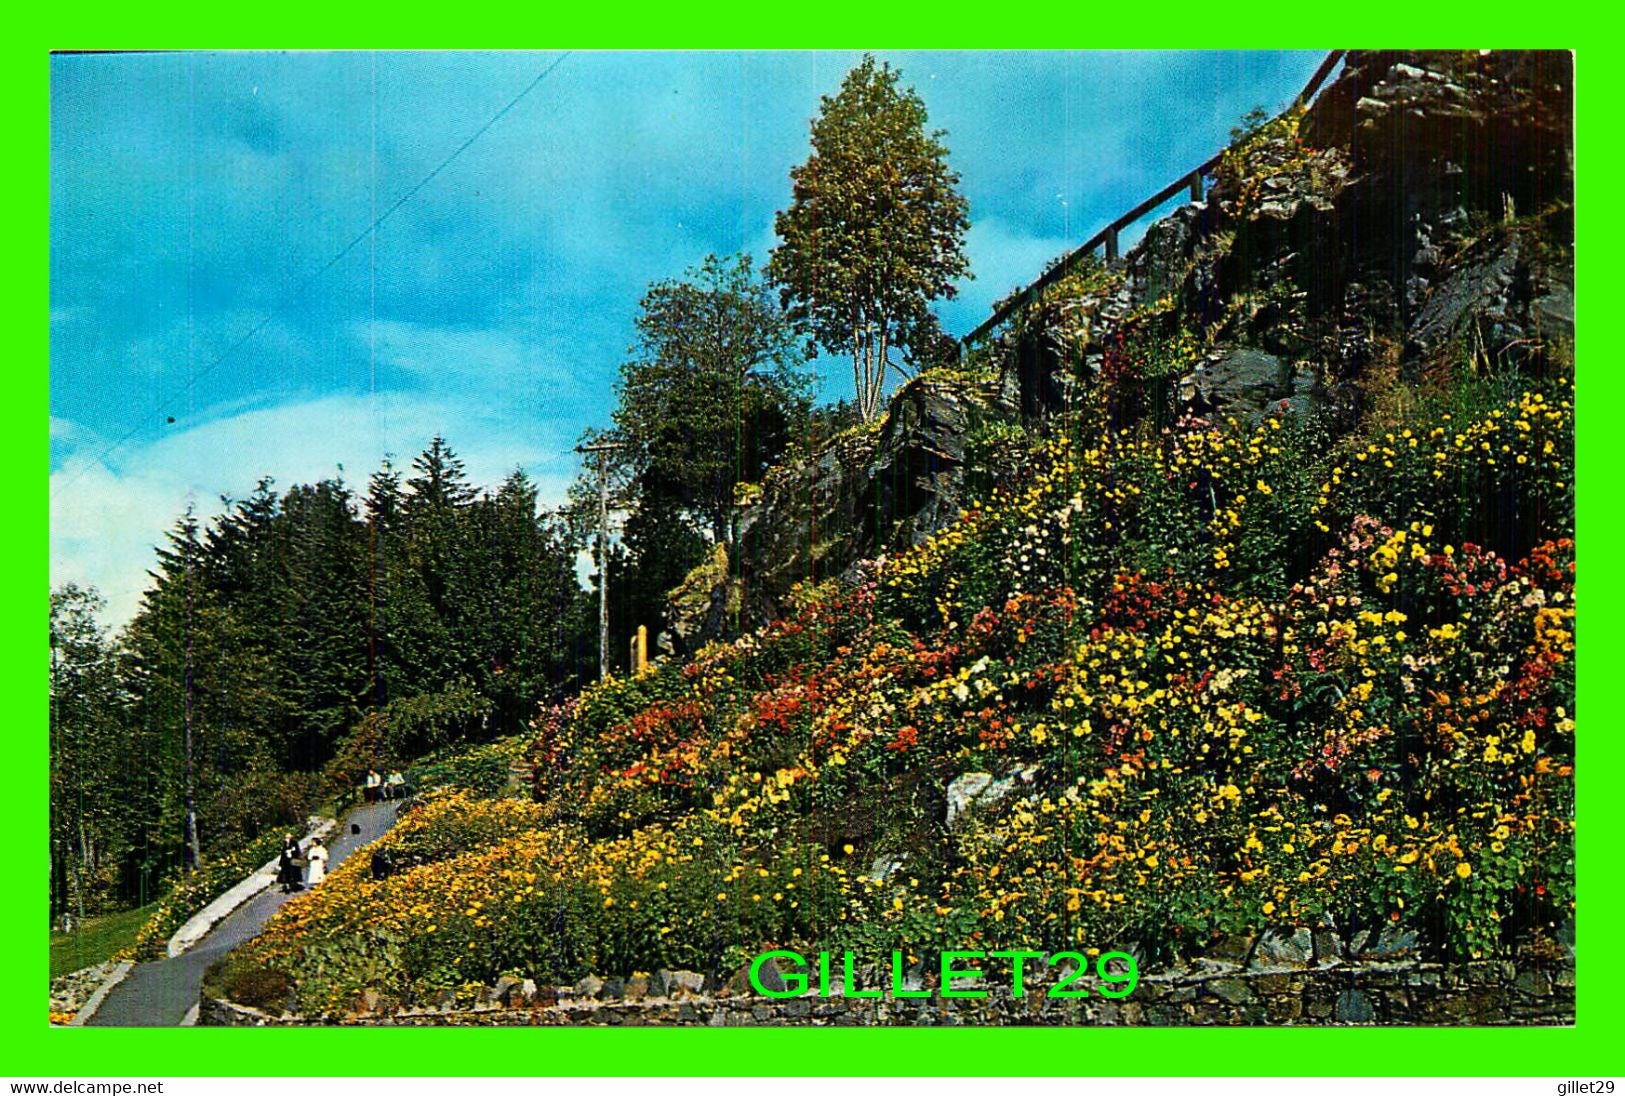 PRINCE RUPERT, BC - THE LARGEST OF THE CIVIC FLOWER GARDENS - TAYLORCHROME - WRATHALL'S - - Prince Rupert